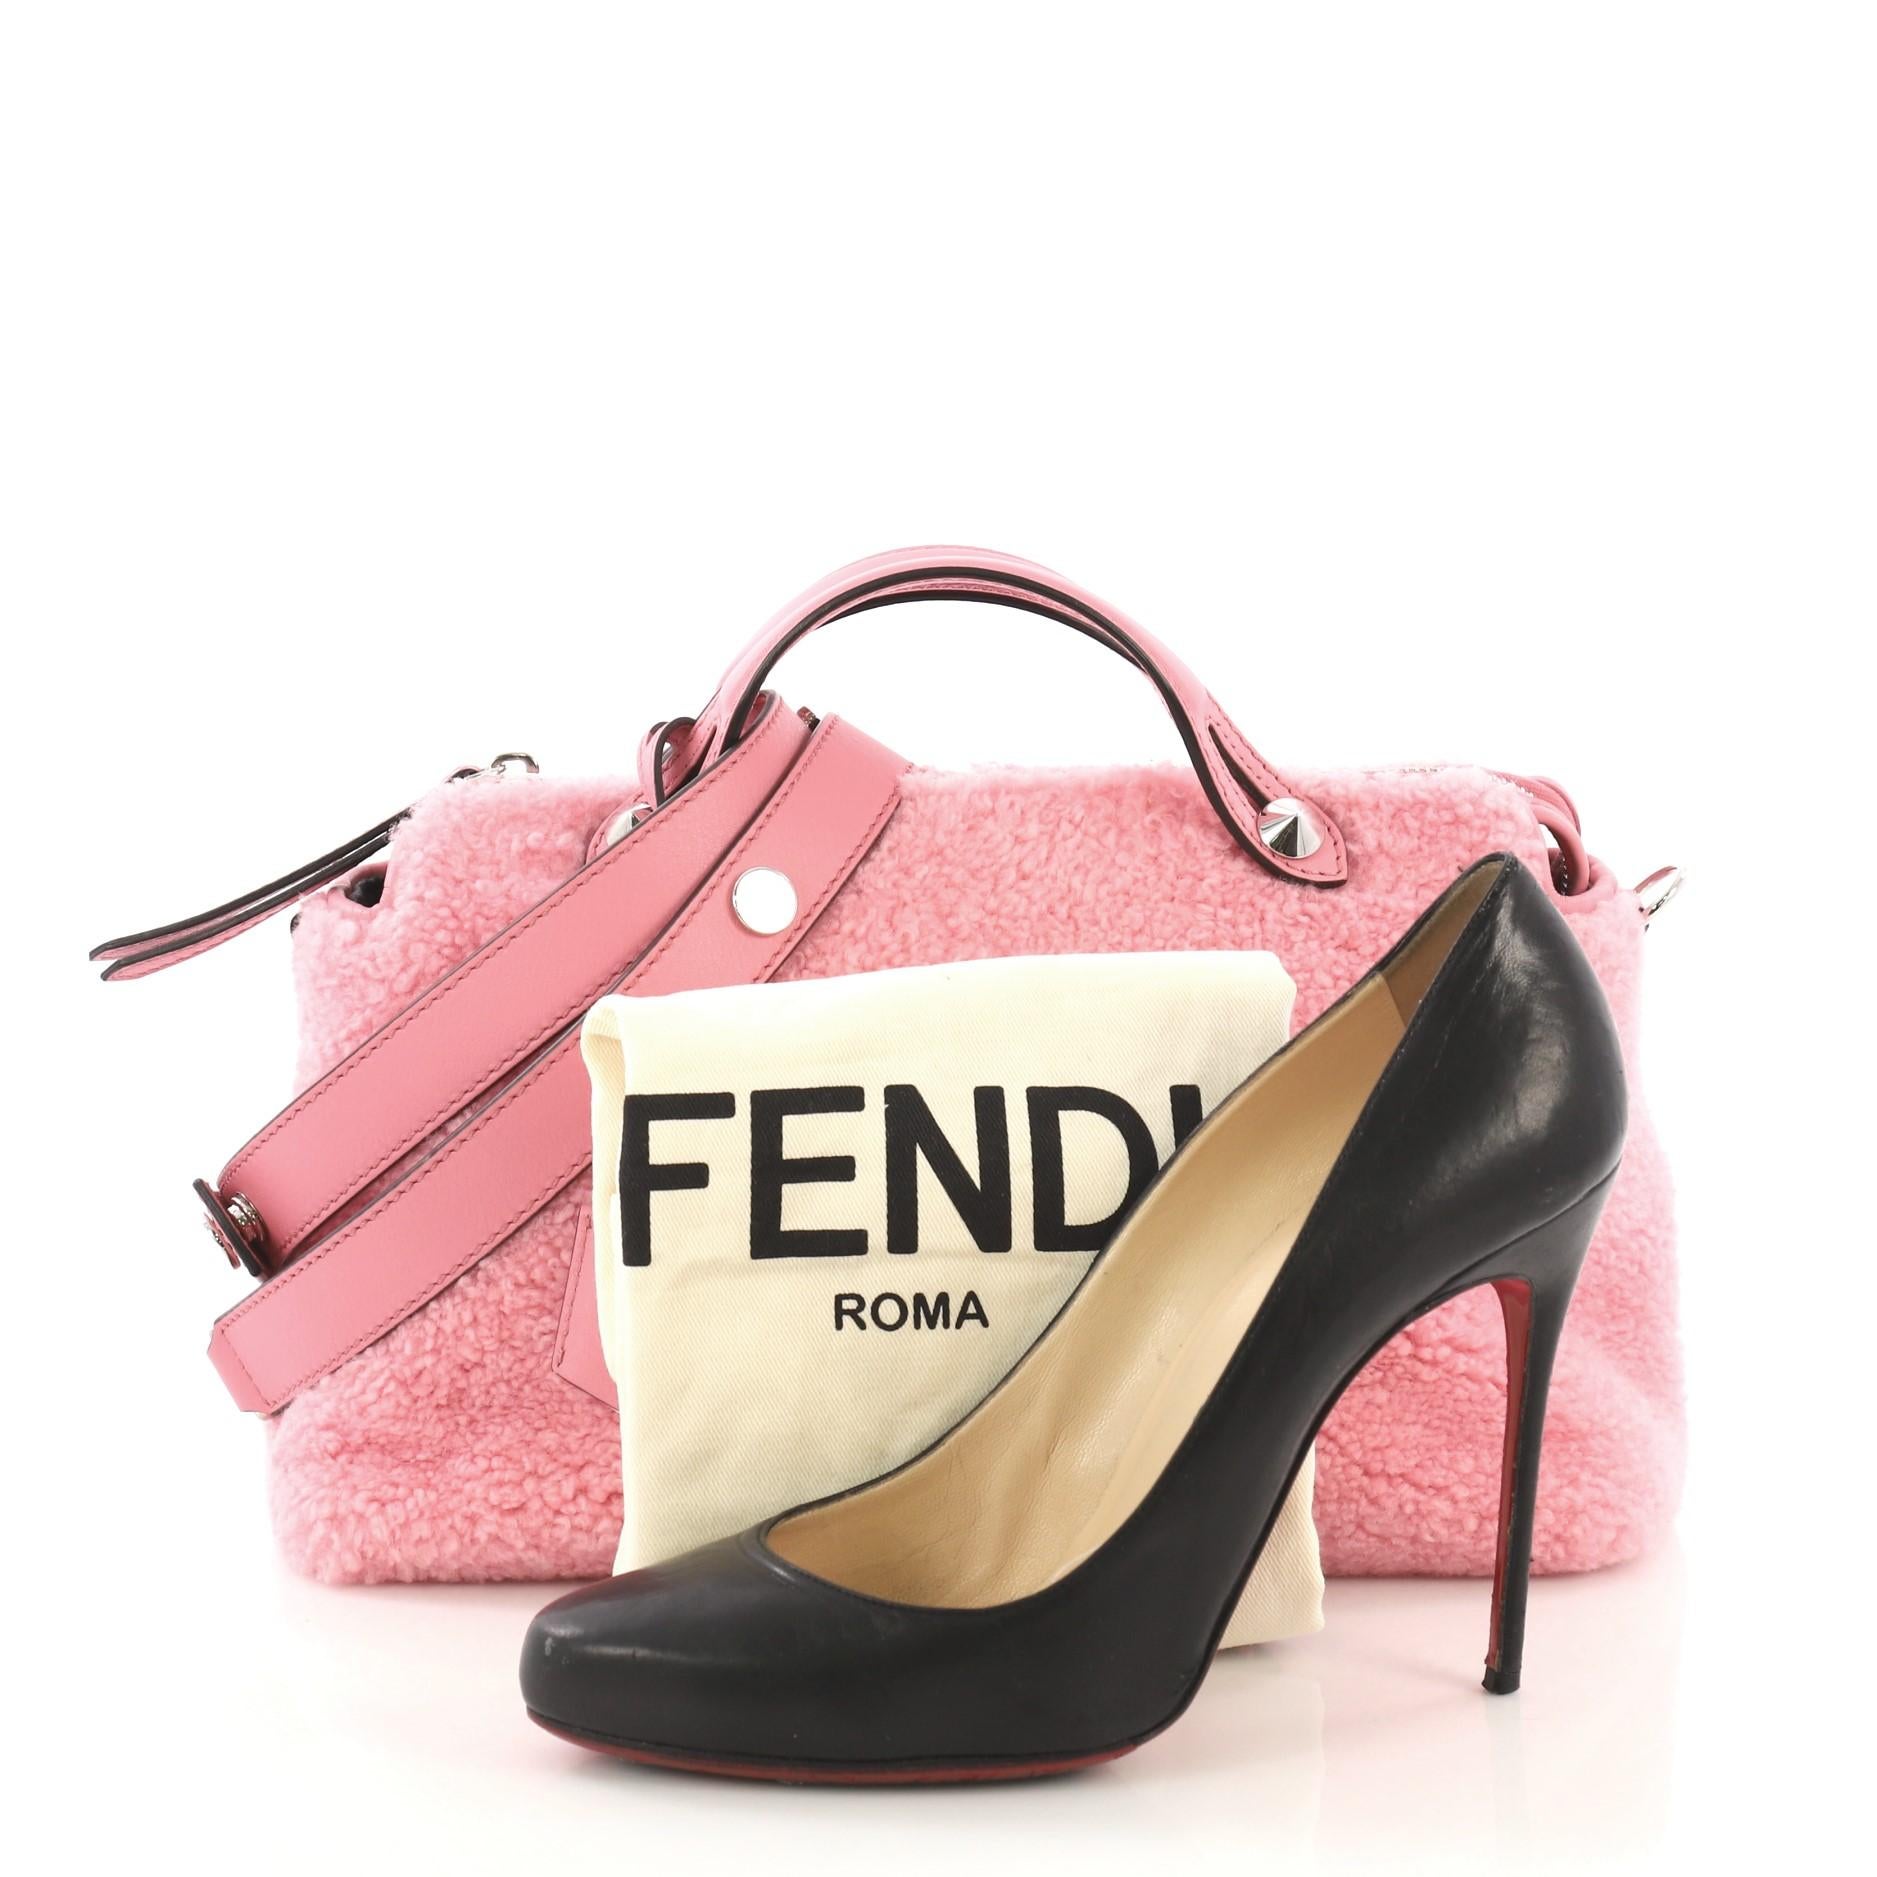 This Fendi By The Way Satchel Shearling Small, crafted from pink shearling, features dual flat top handles and silver-tone hardware. Its top zip closure opens to a gray fabric interior with a center zip compartment and slip pockets. **Note: Shoe